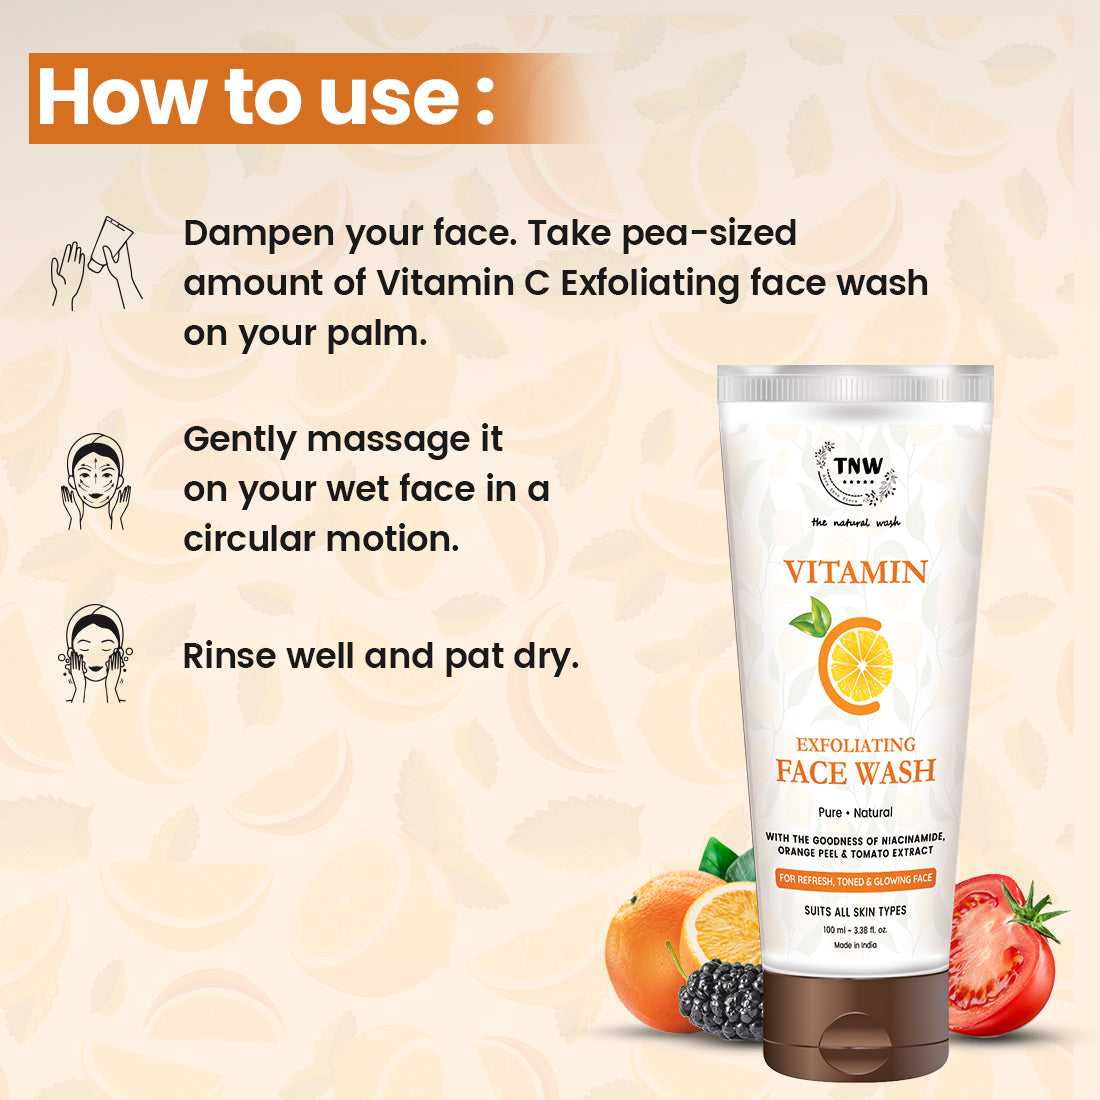 How to use Vitamin C Face Wash